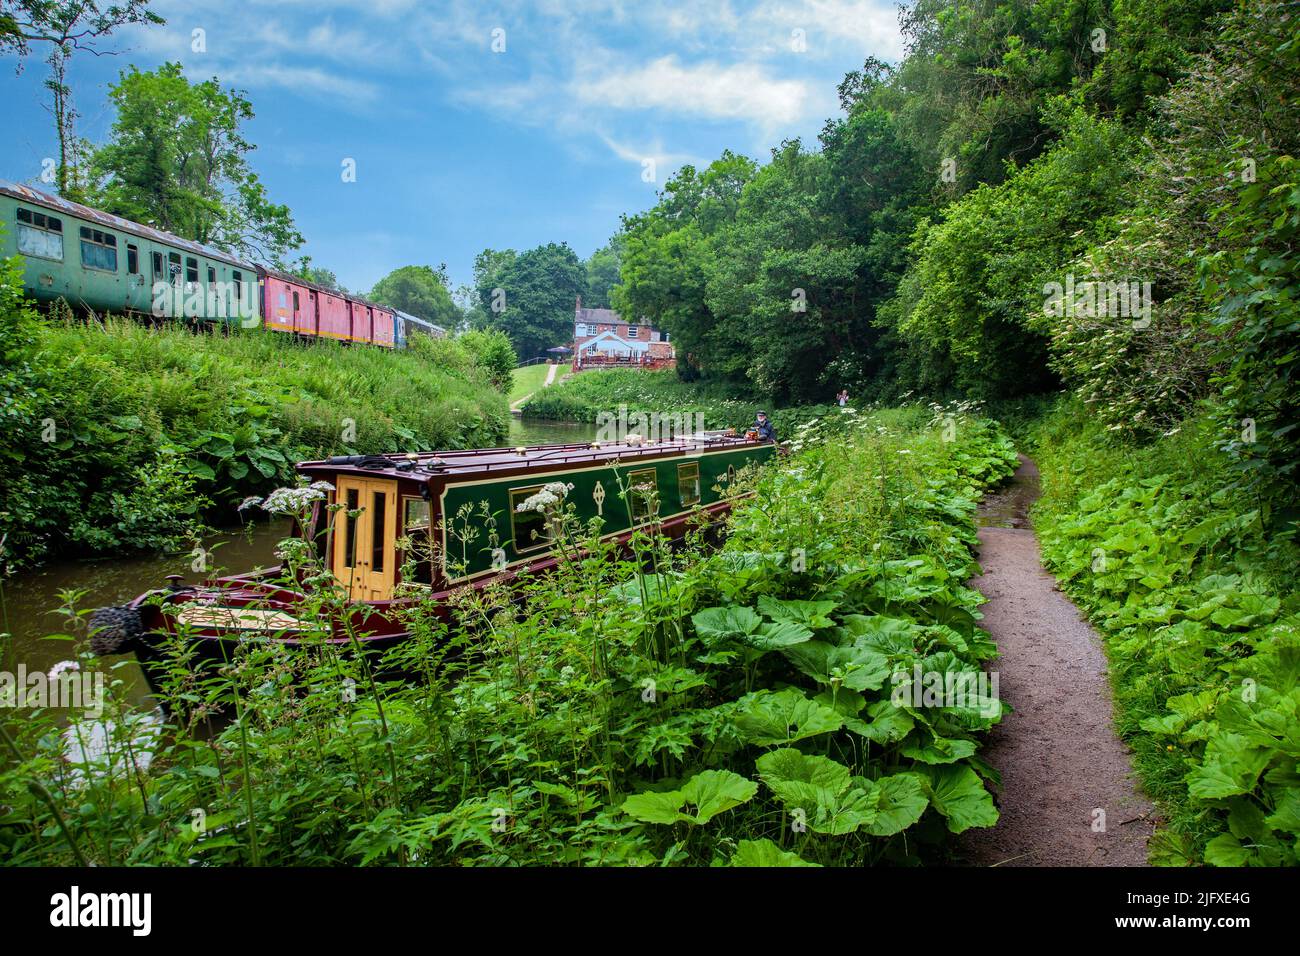 Narrowboat moored on the Caldon canal Staffordshire with a train on the Churnet valley railway in the background Stock Photo